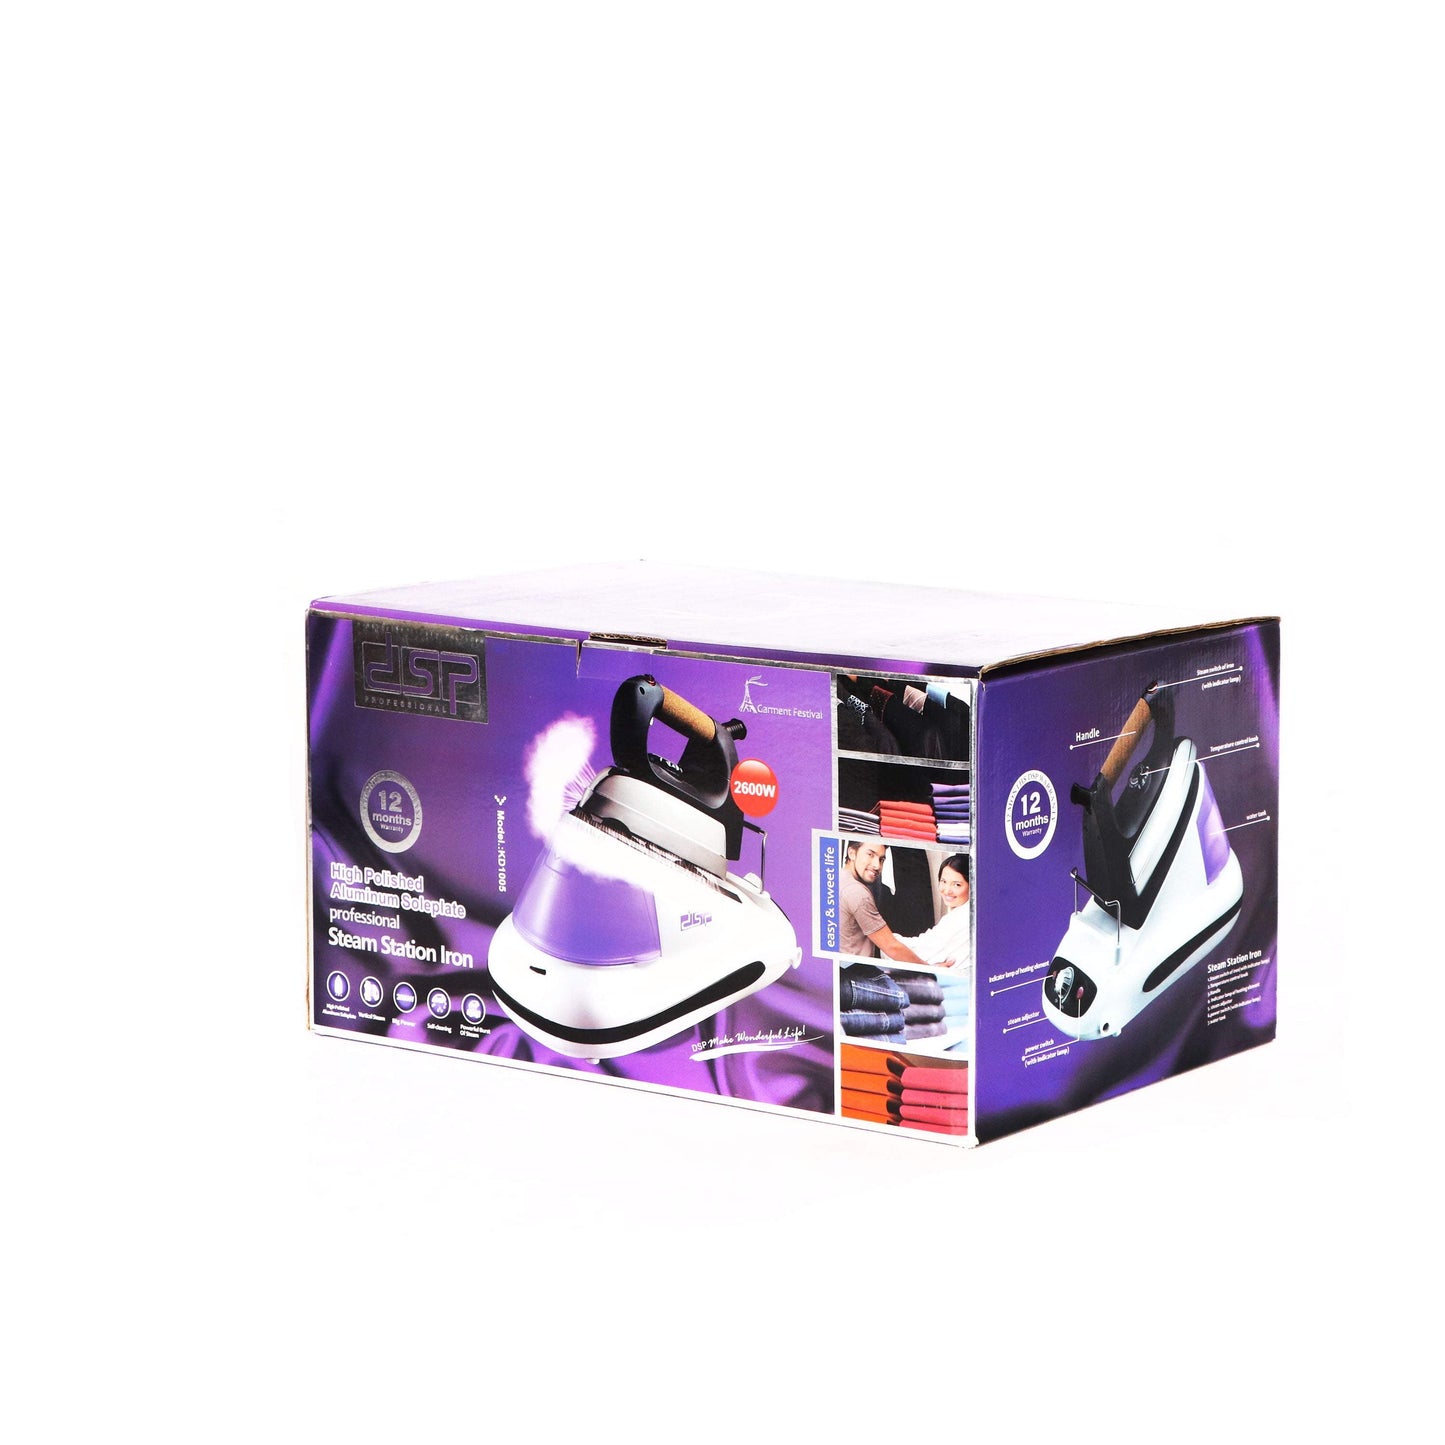 DSP Iron with steam generator 2600W purple-Royal Brands Co-